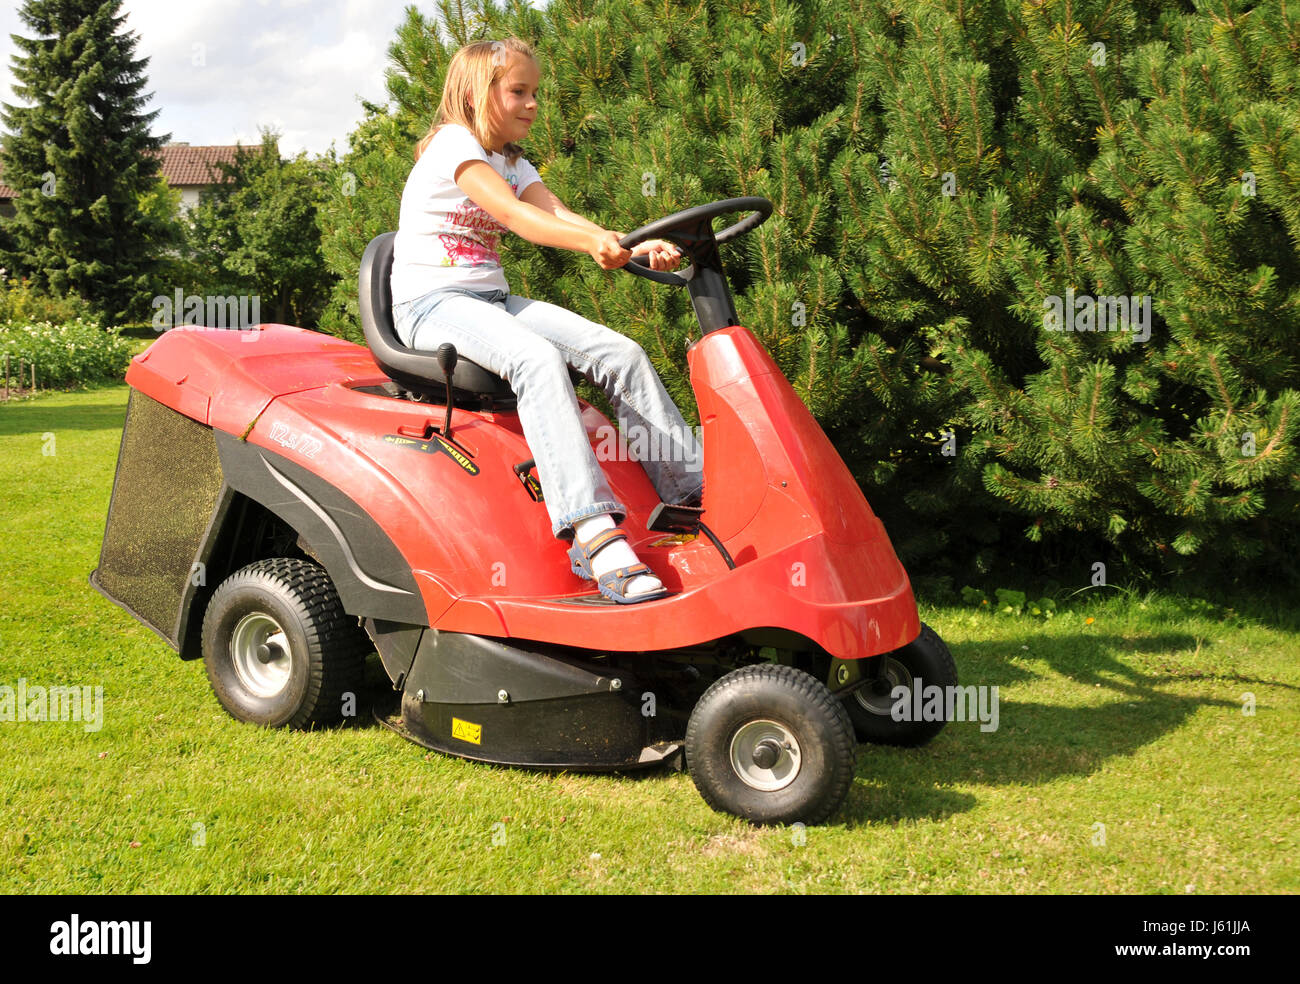 agriculture farming gardening lawnmower child girl girls teens teenagers youth Stock Photo